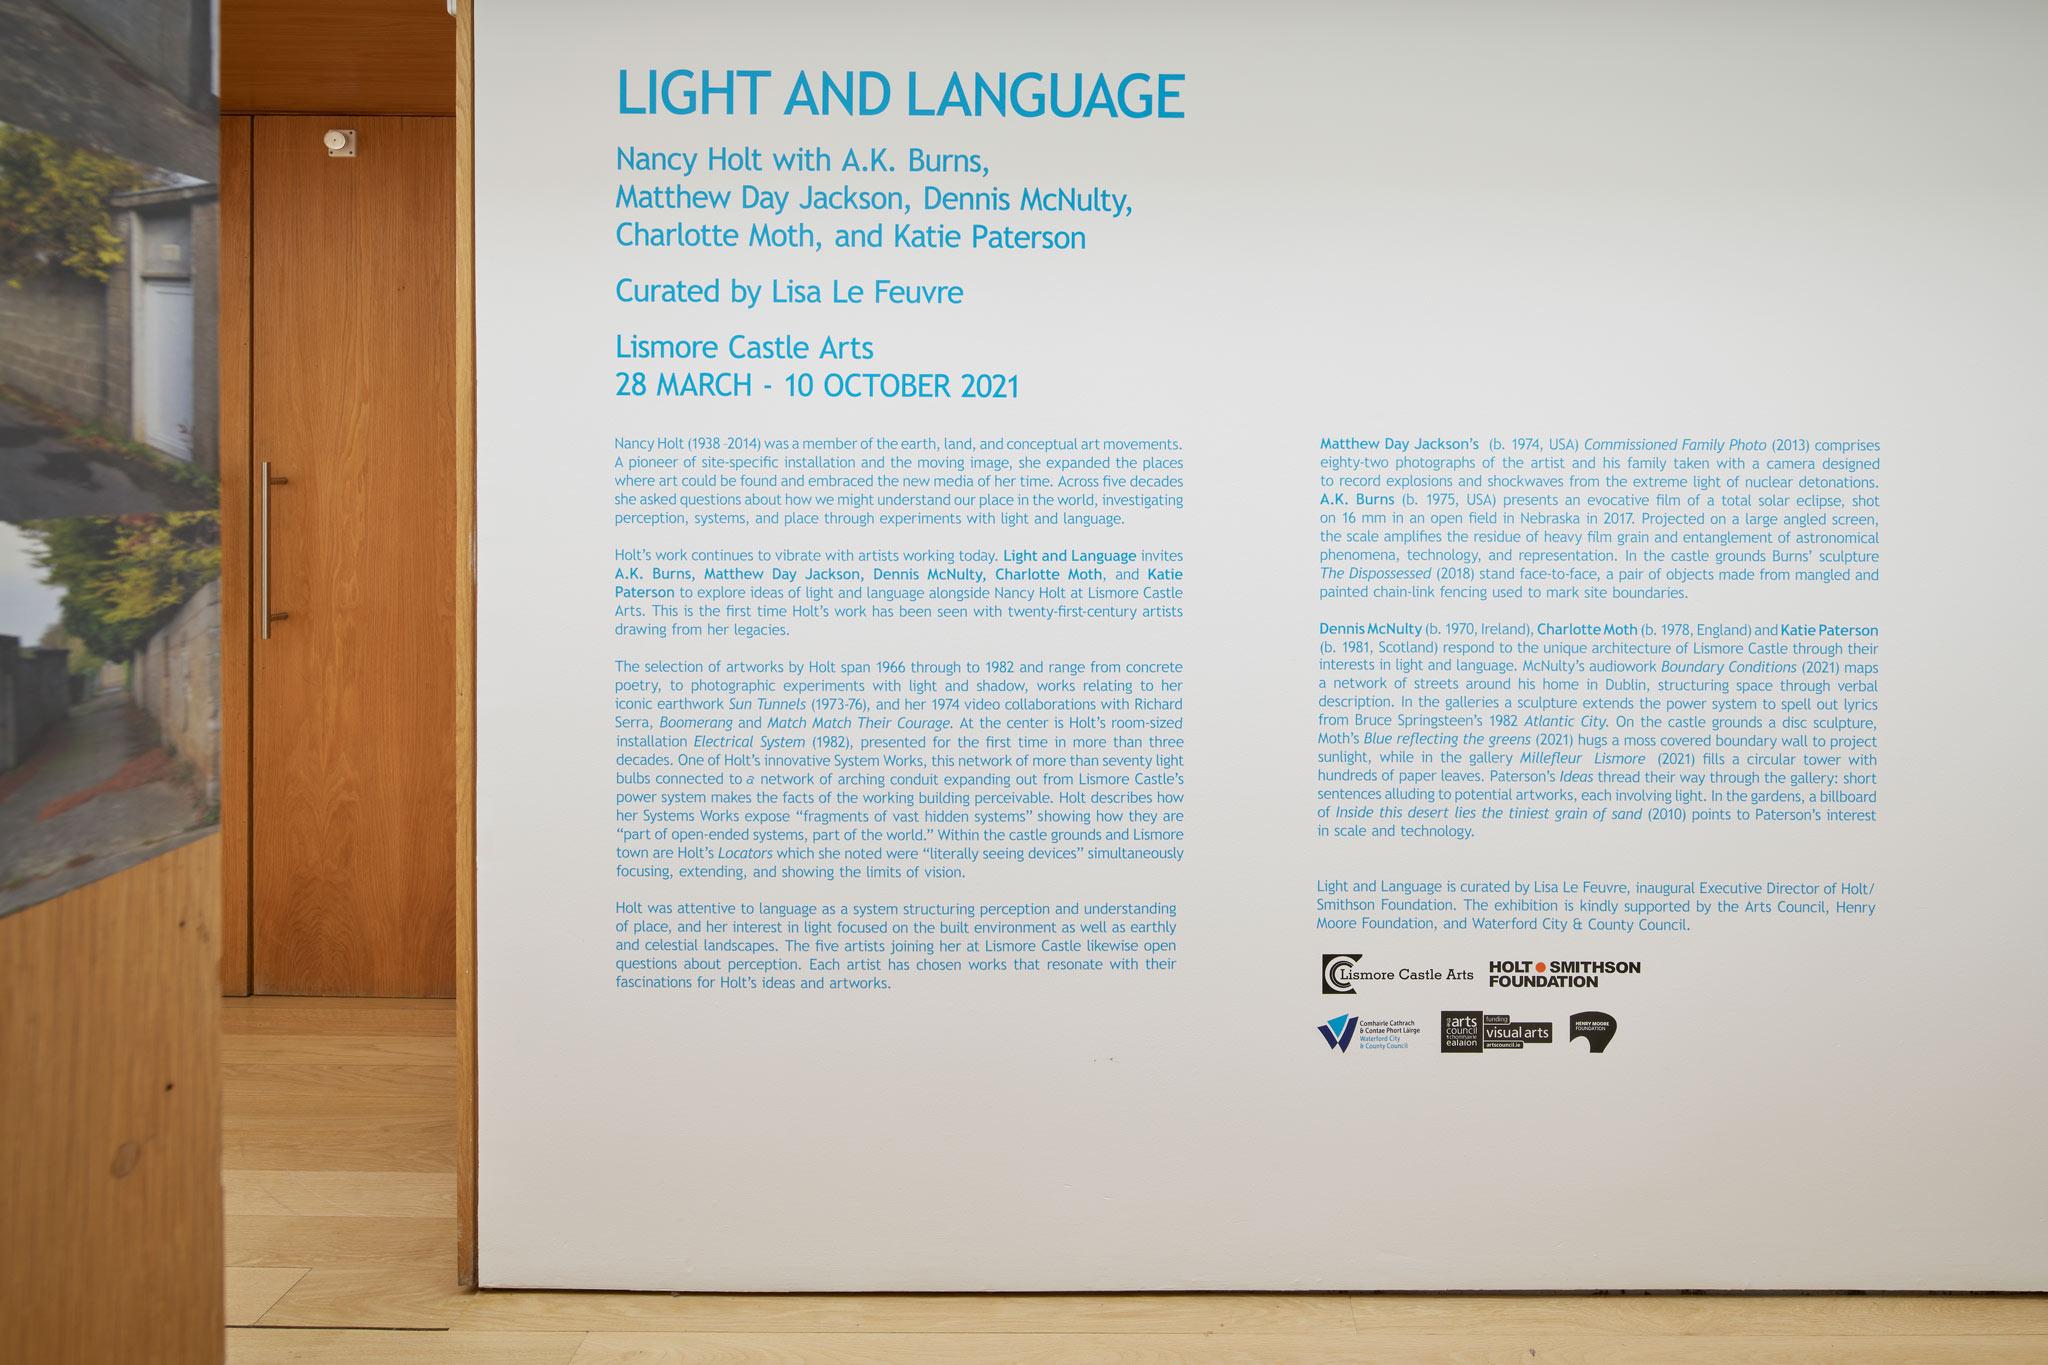 a wall text for the exhibition Light and Language on a gallery wall